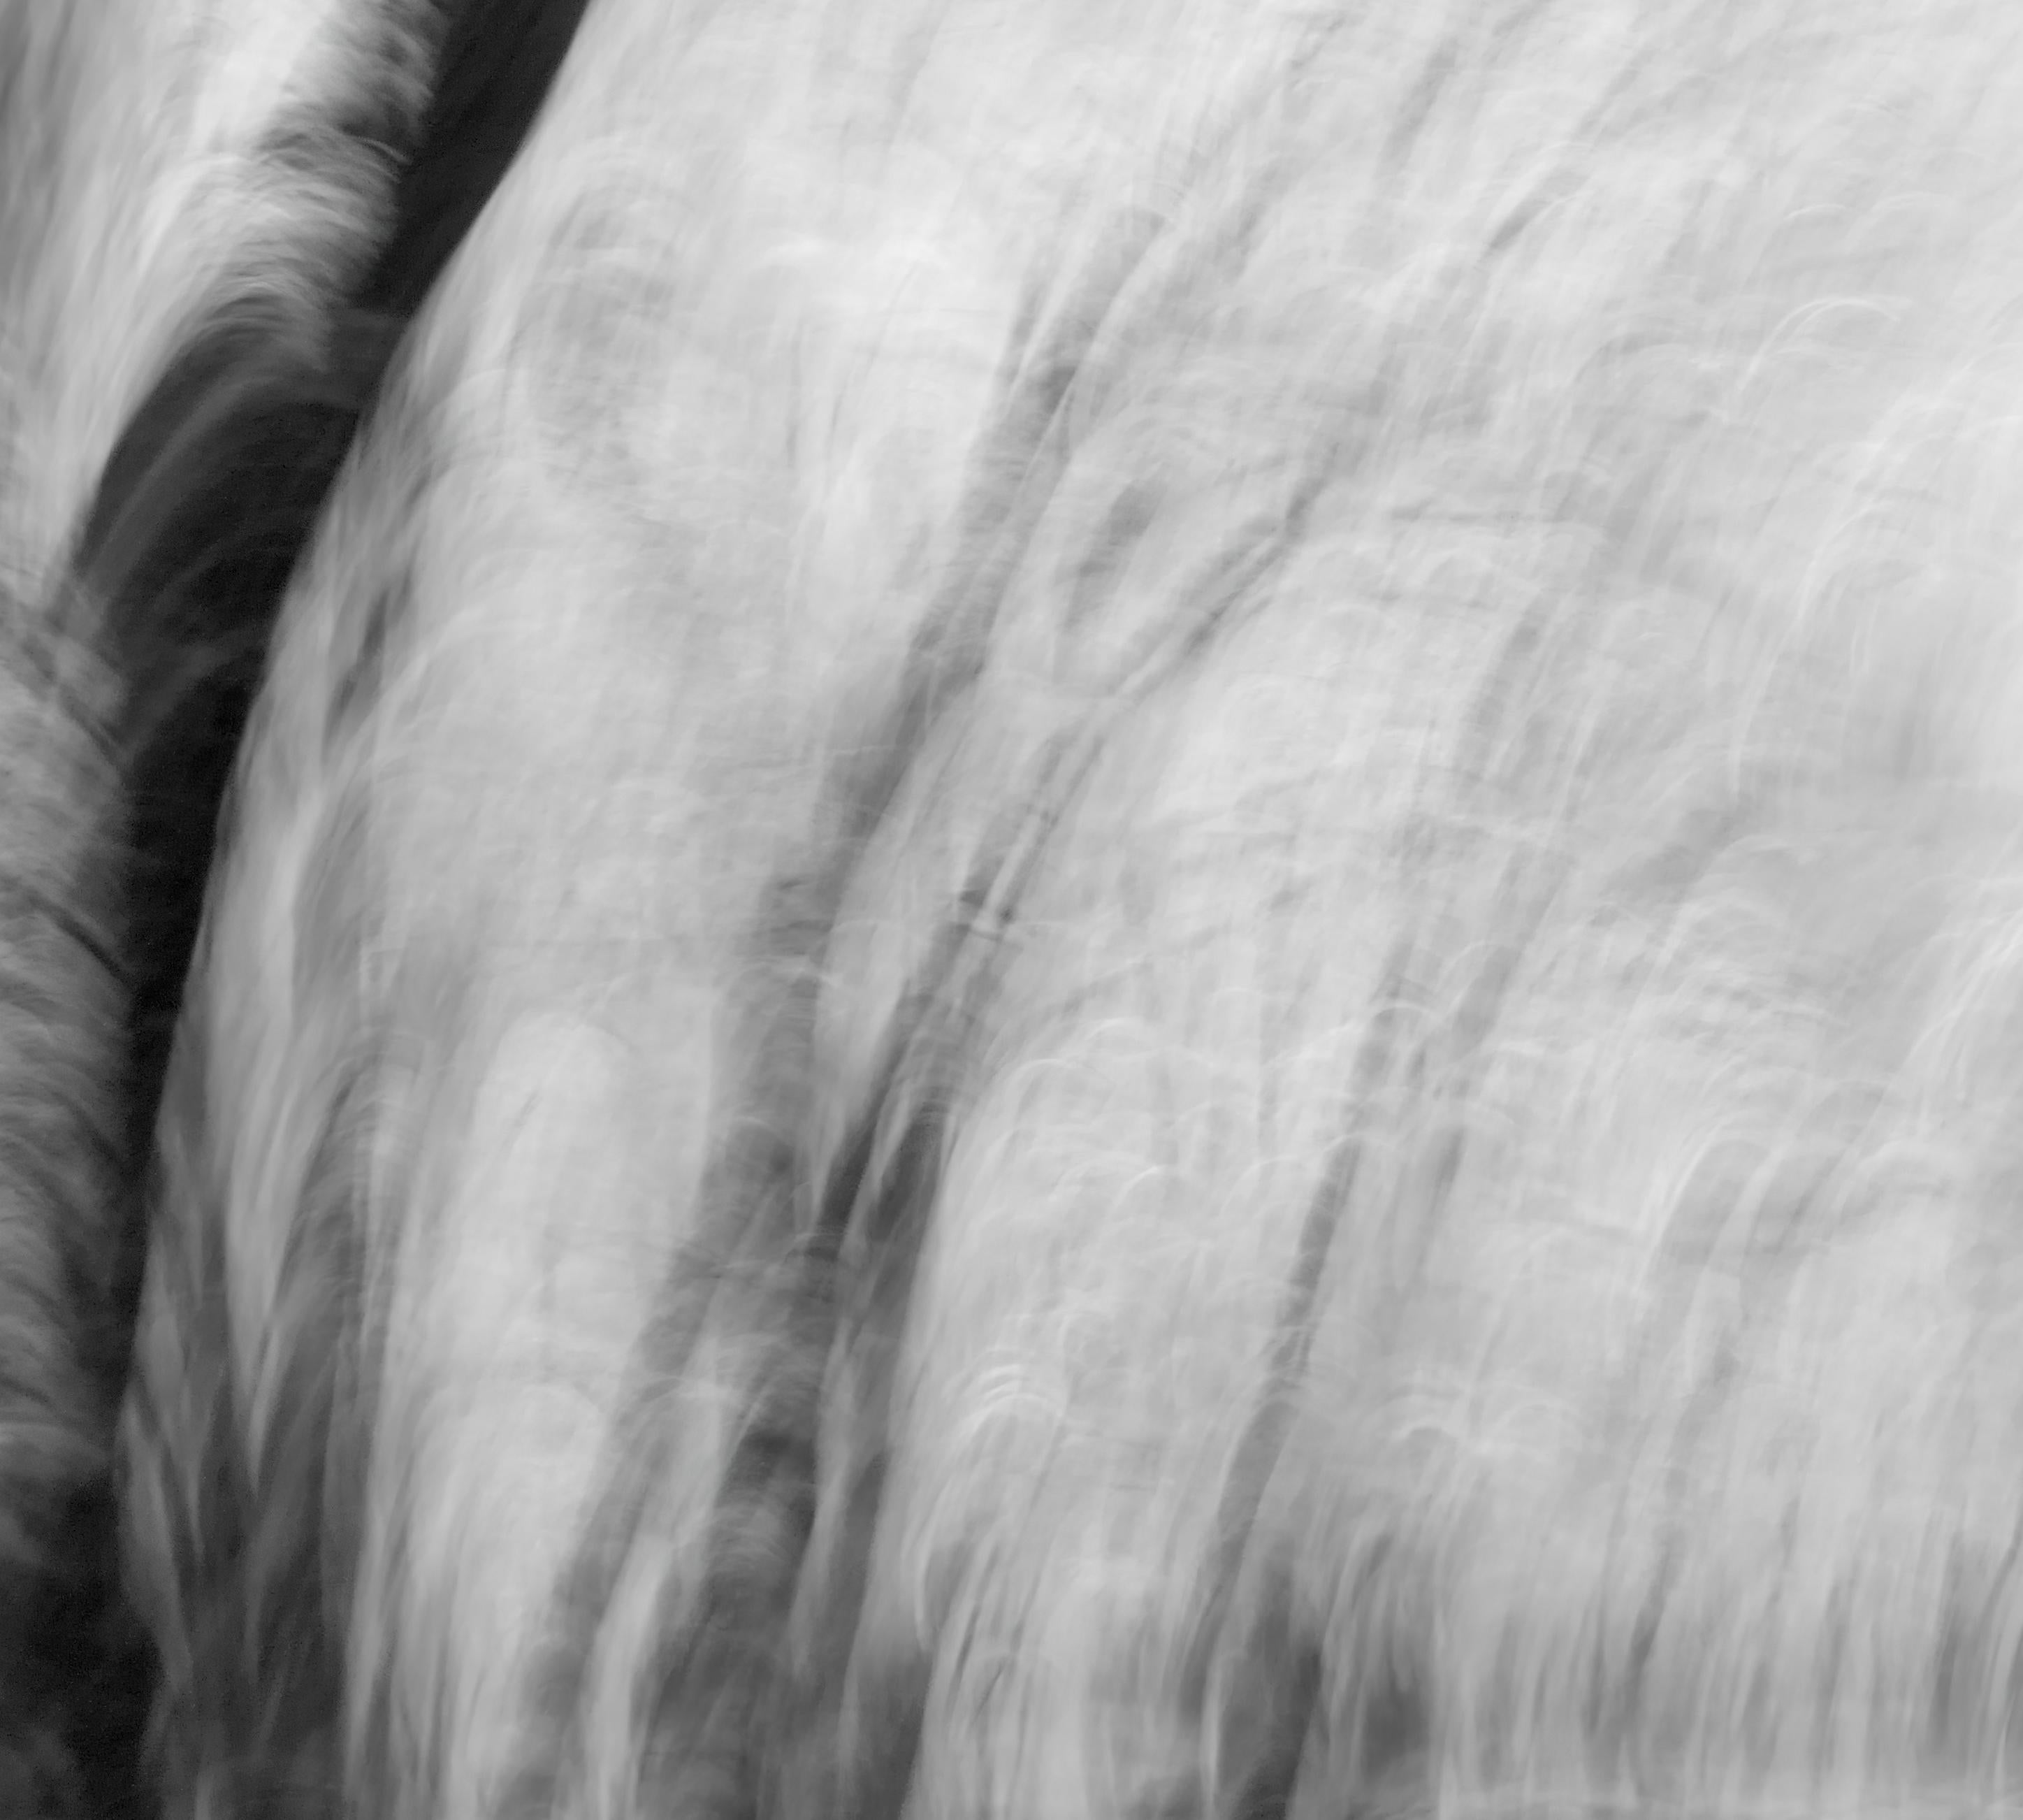  Landscape Photograph Nature Large Abstract Trees Wildlife India Black White - Gray Abstract Photograph by Aditya Dicky Singh